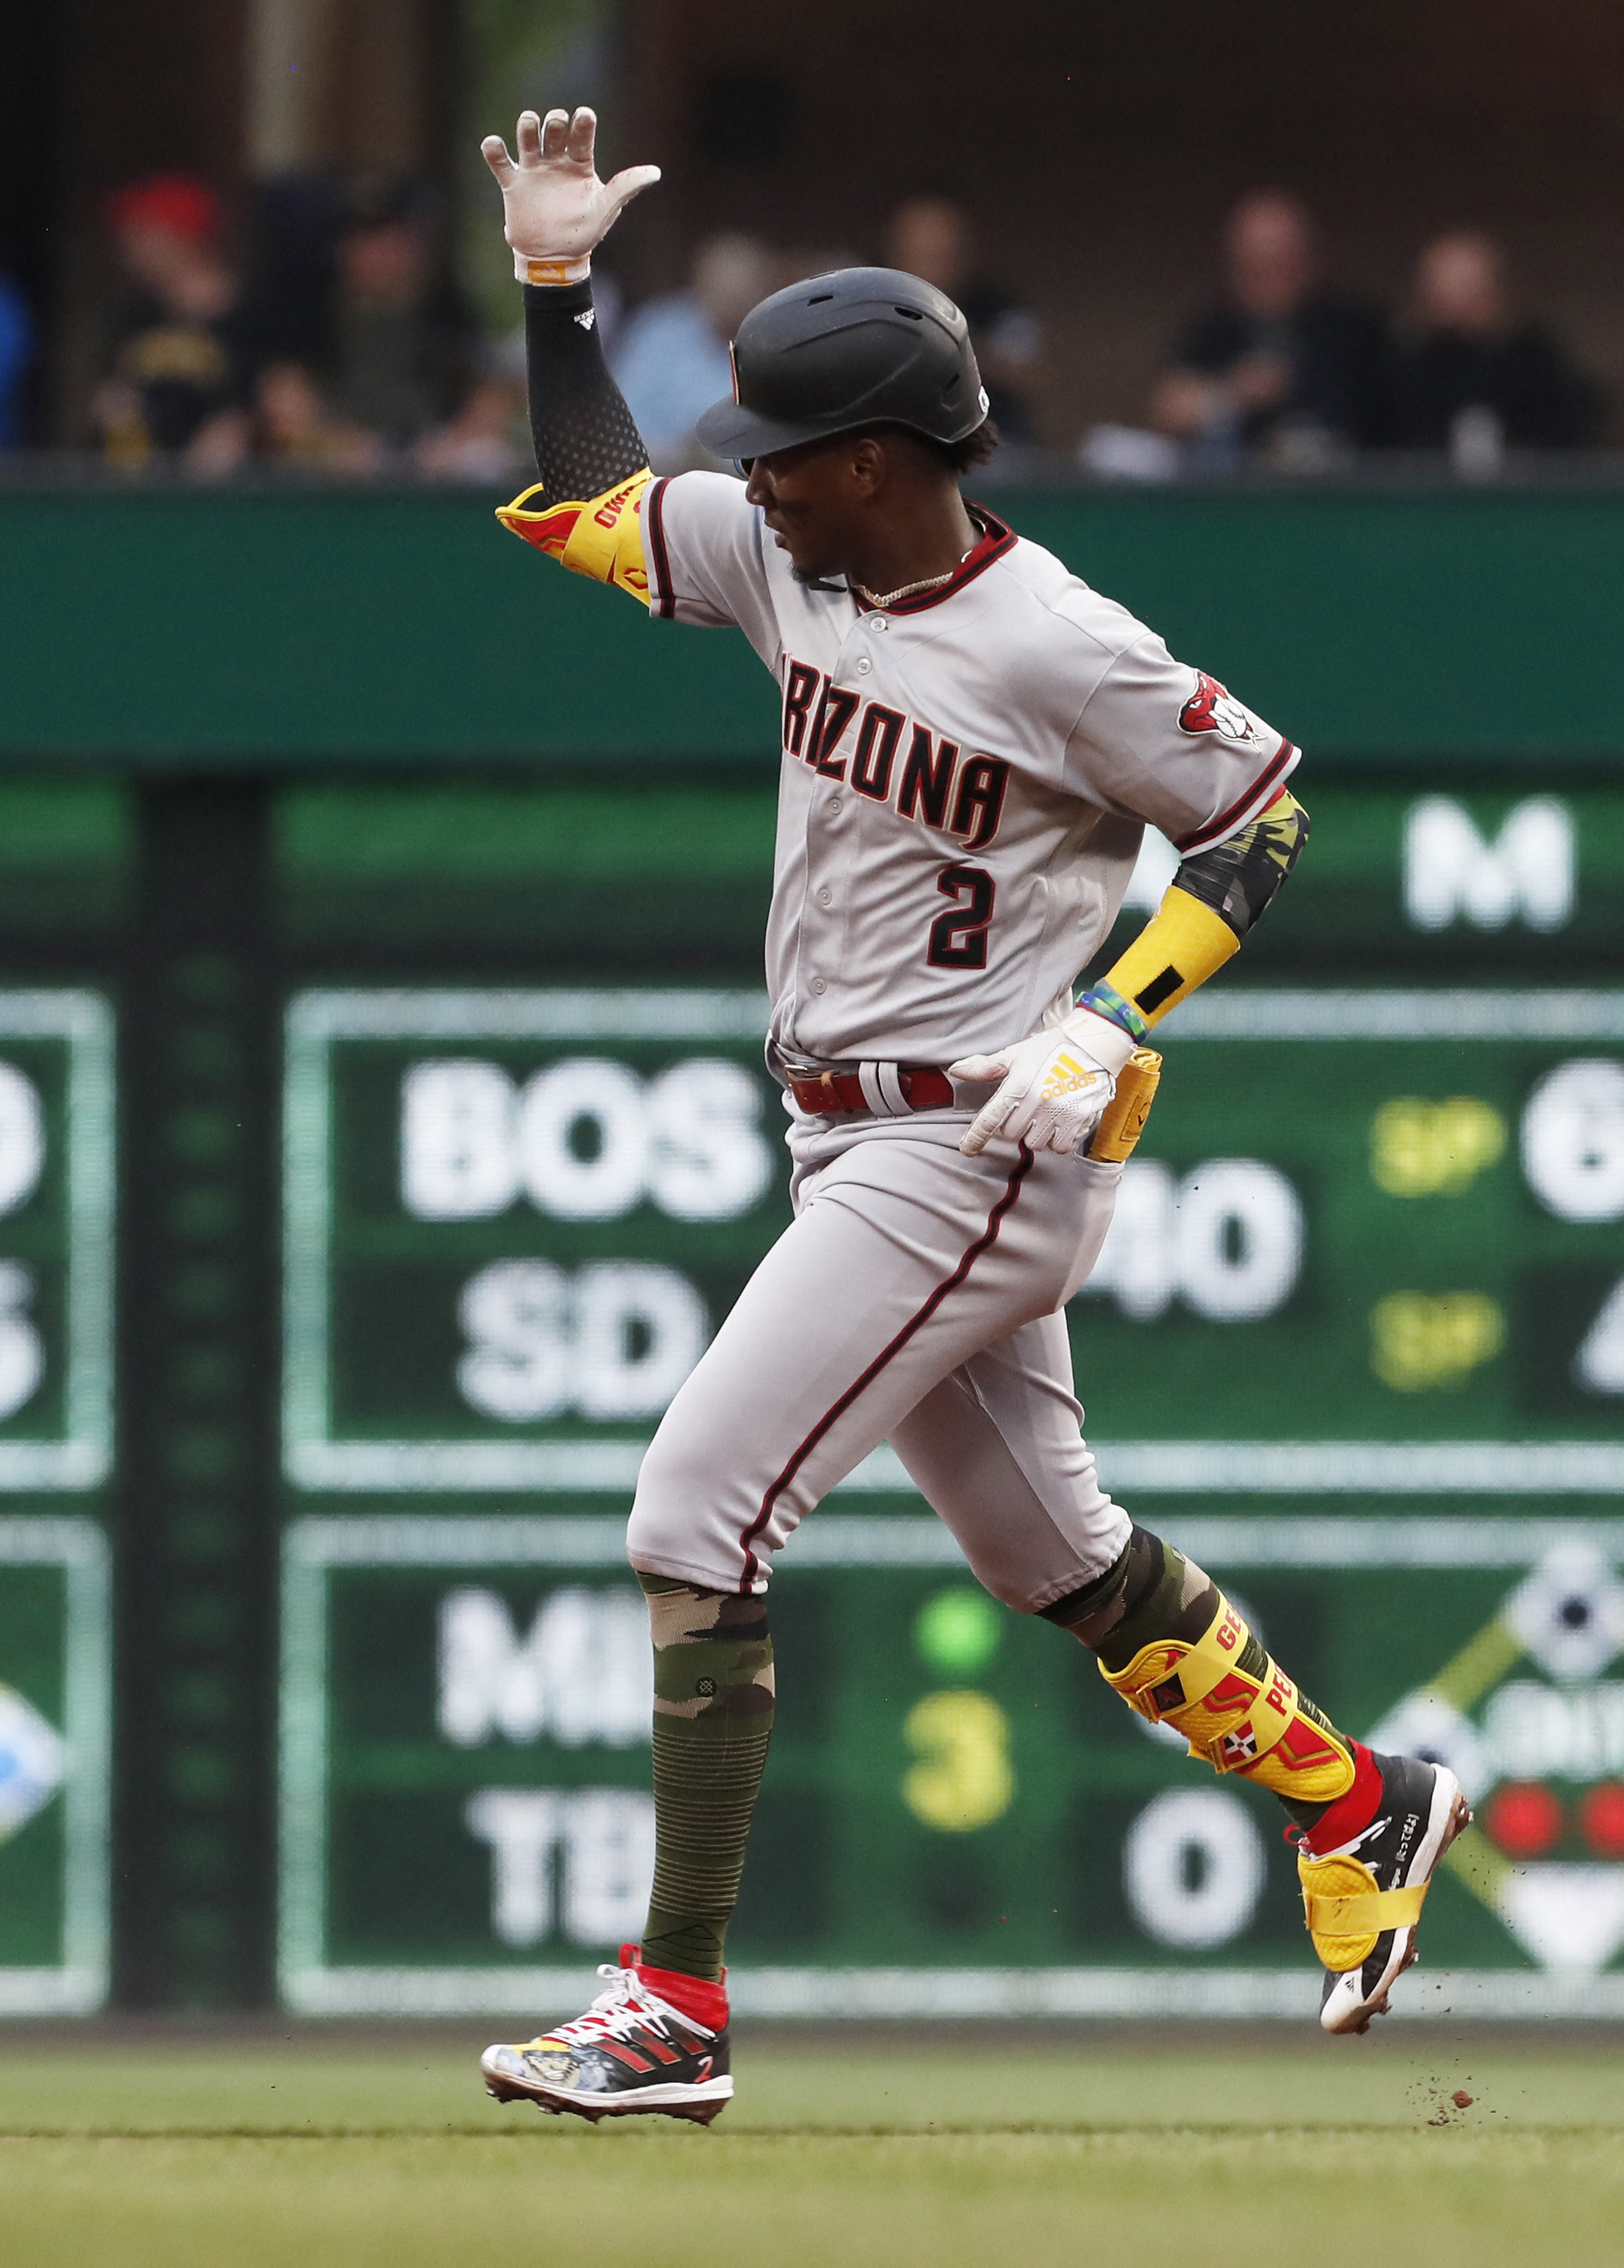 Pirates ride seven-run inning to rout of D-backs